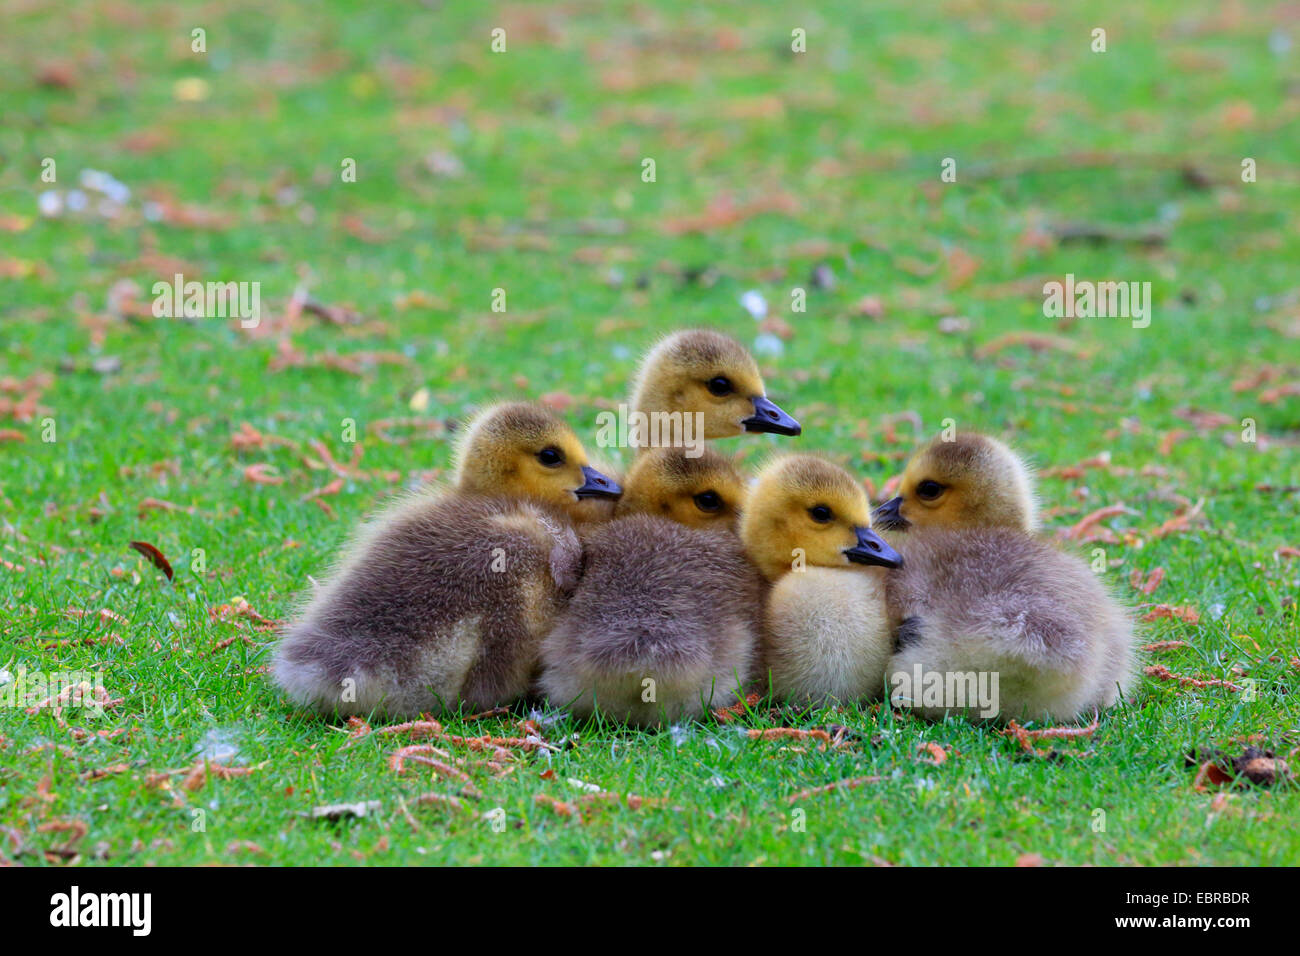 Canada goose (Branta canadensis), five chicks cuddling together, Germany Stock Photo